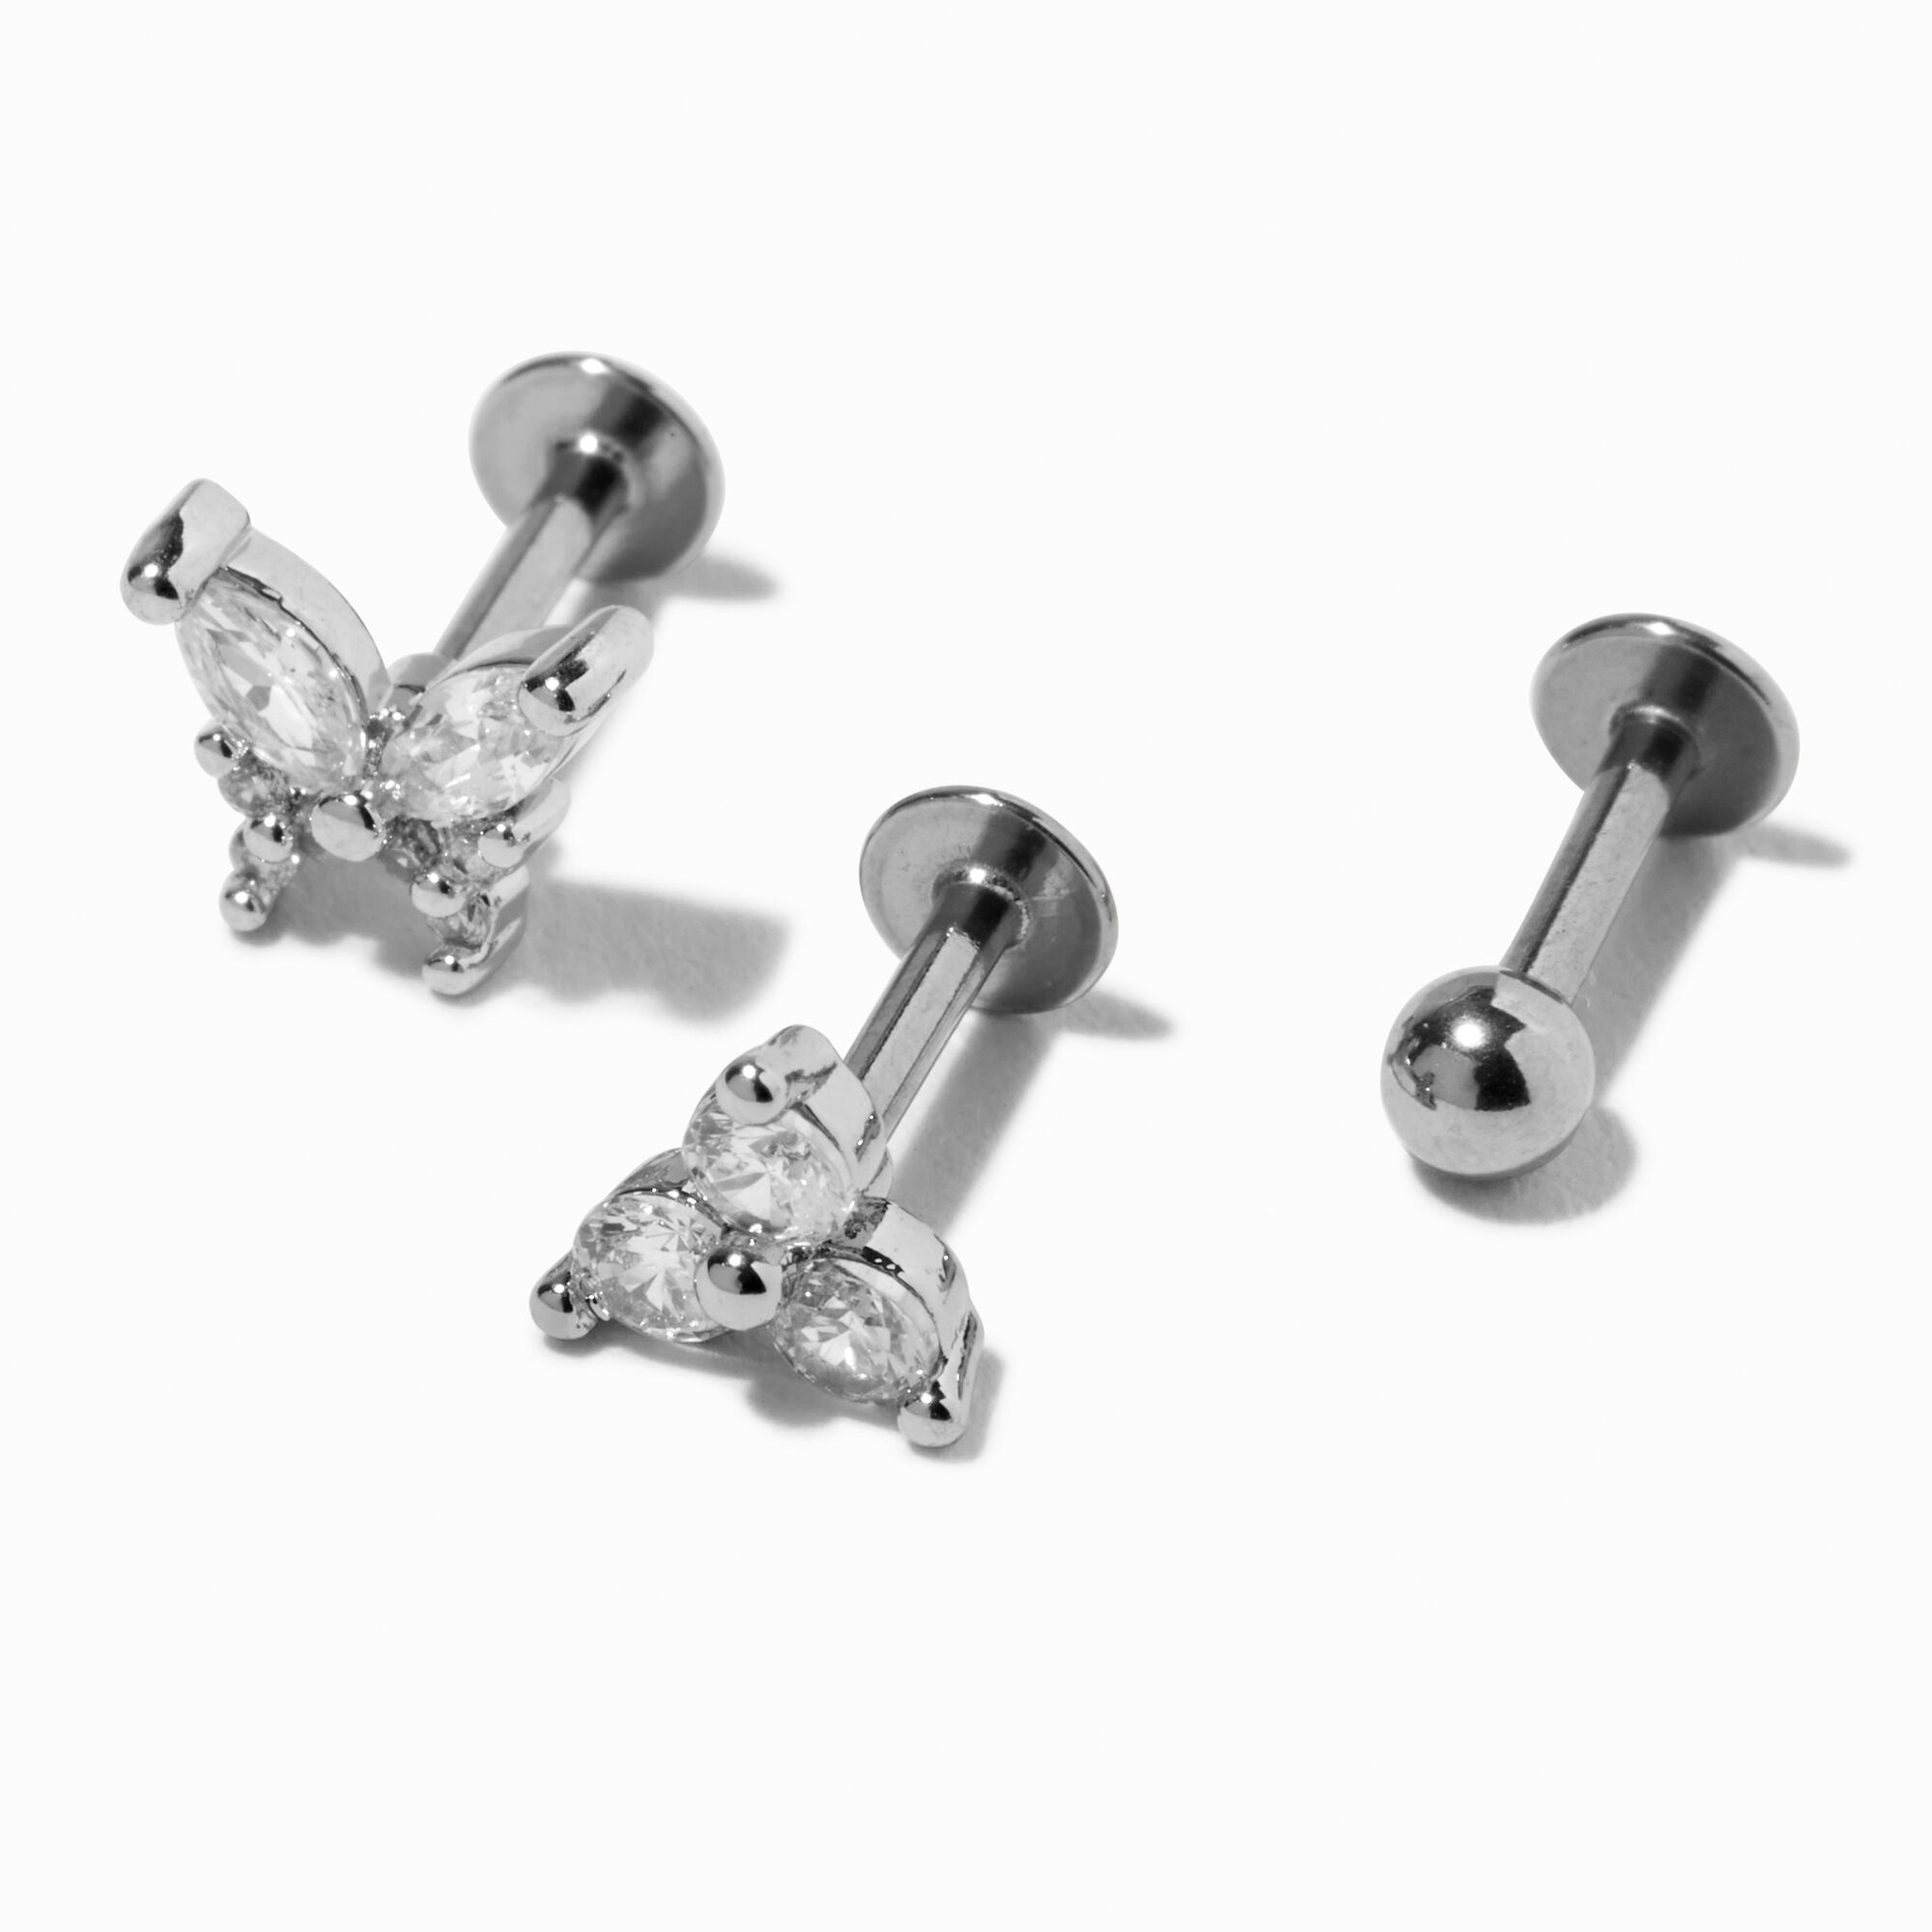 View Claires Tone 16G Butterfly Crystal Cartilage Earrings 3 Pack Silver information